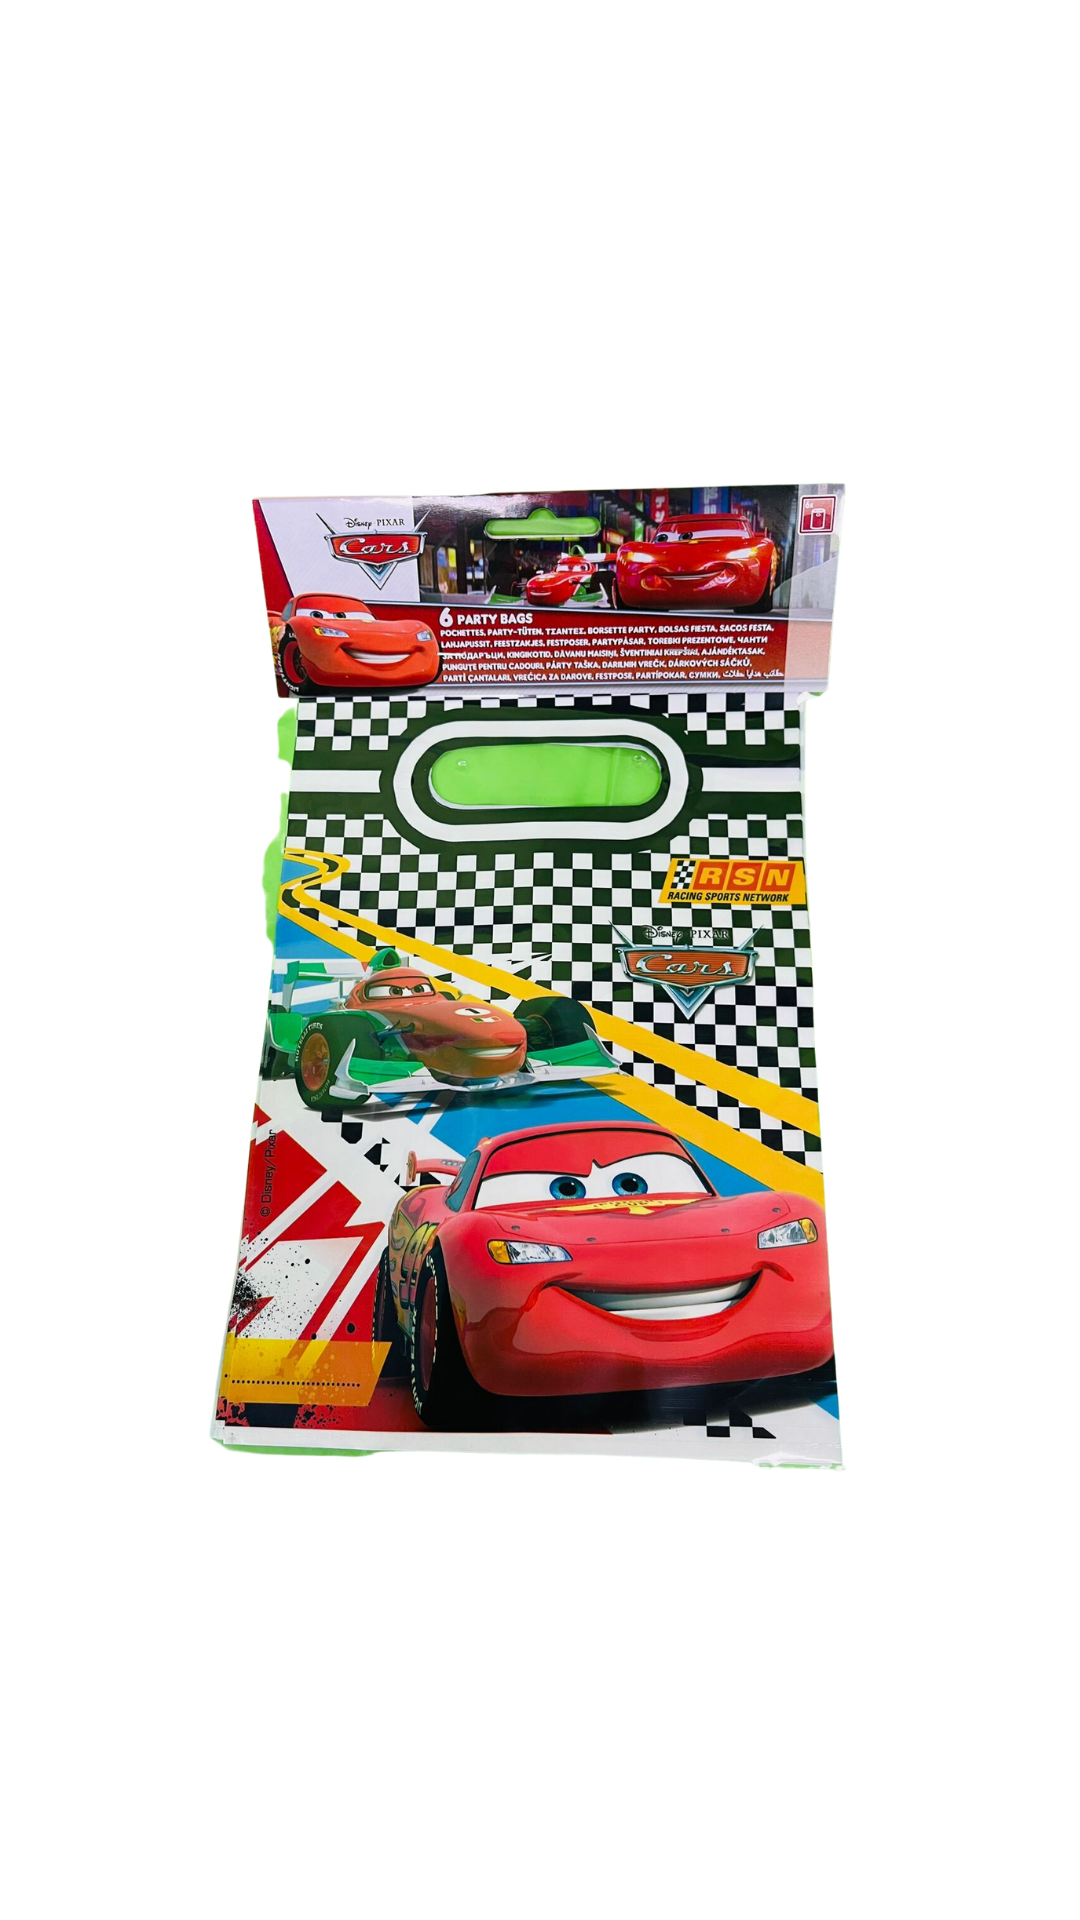 Qualatex Official Disney Cars loot bags BUY ONE GET ONE FREE - 815625